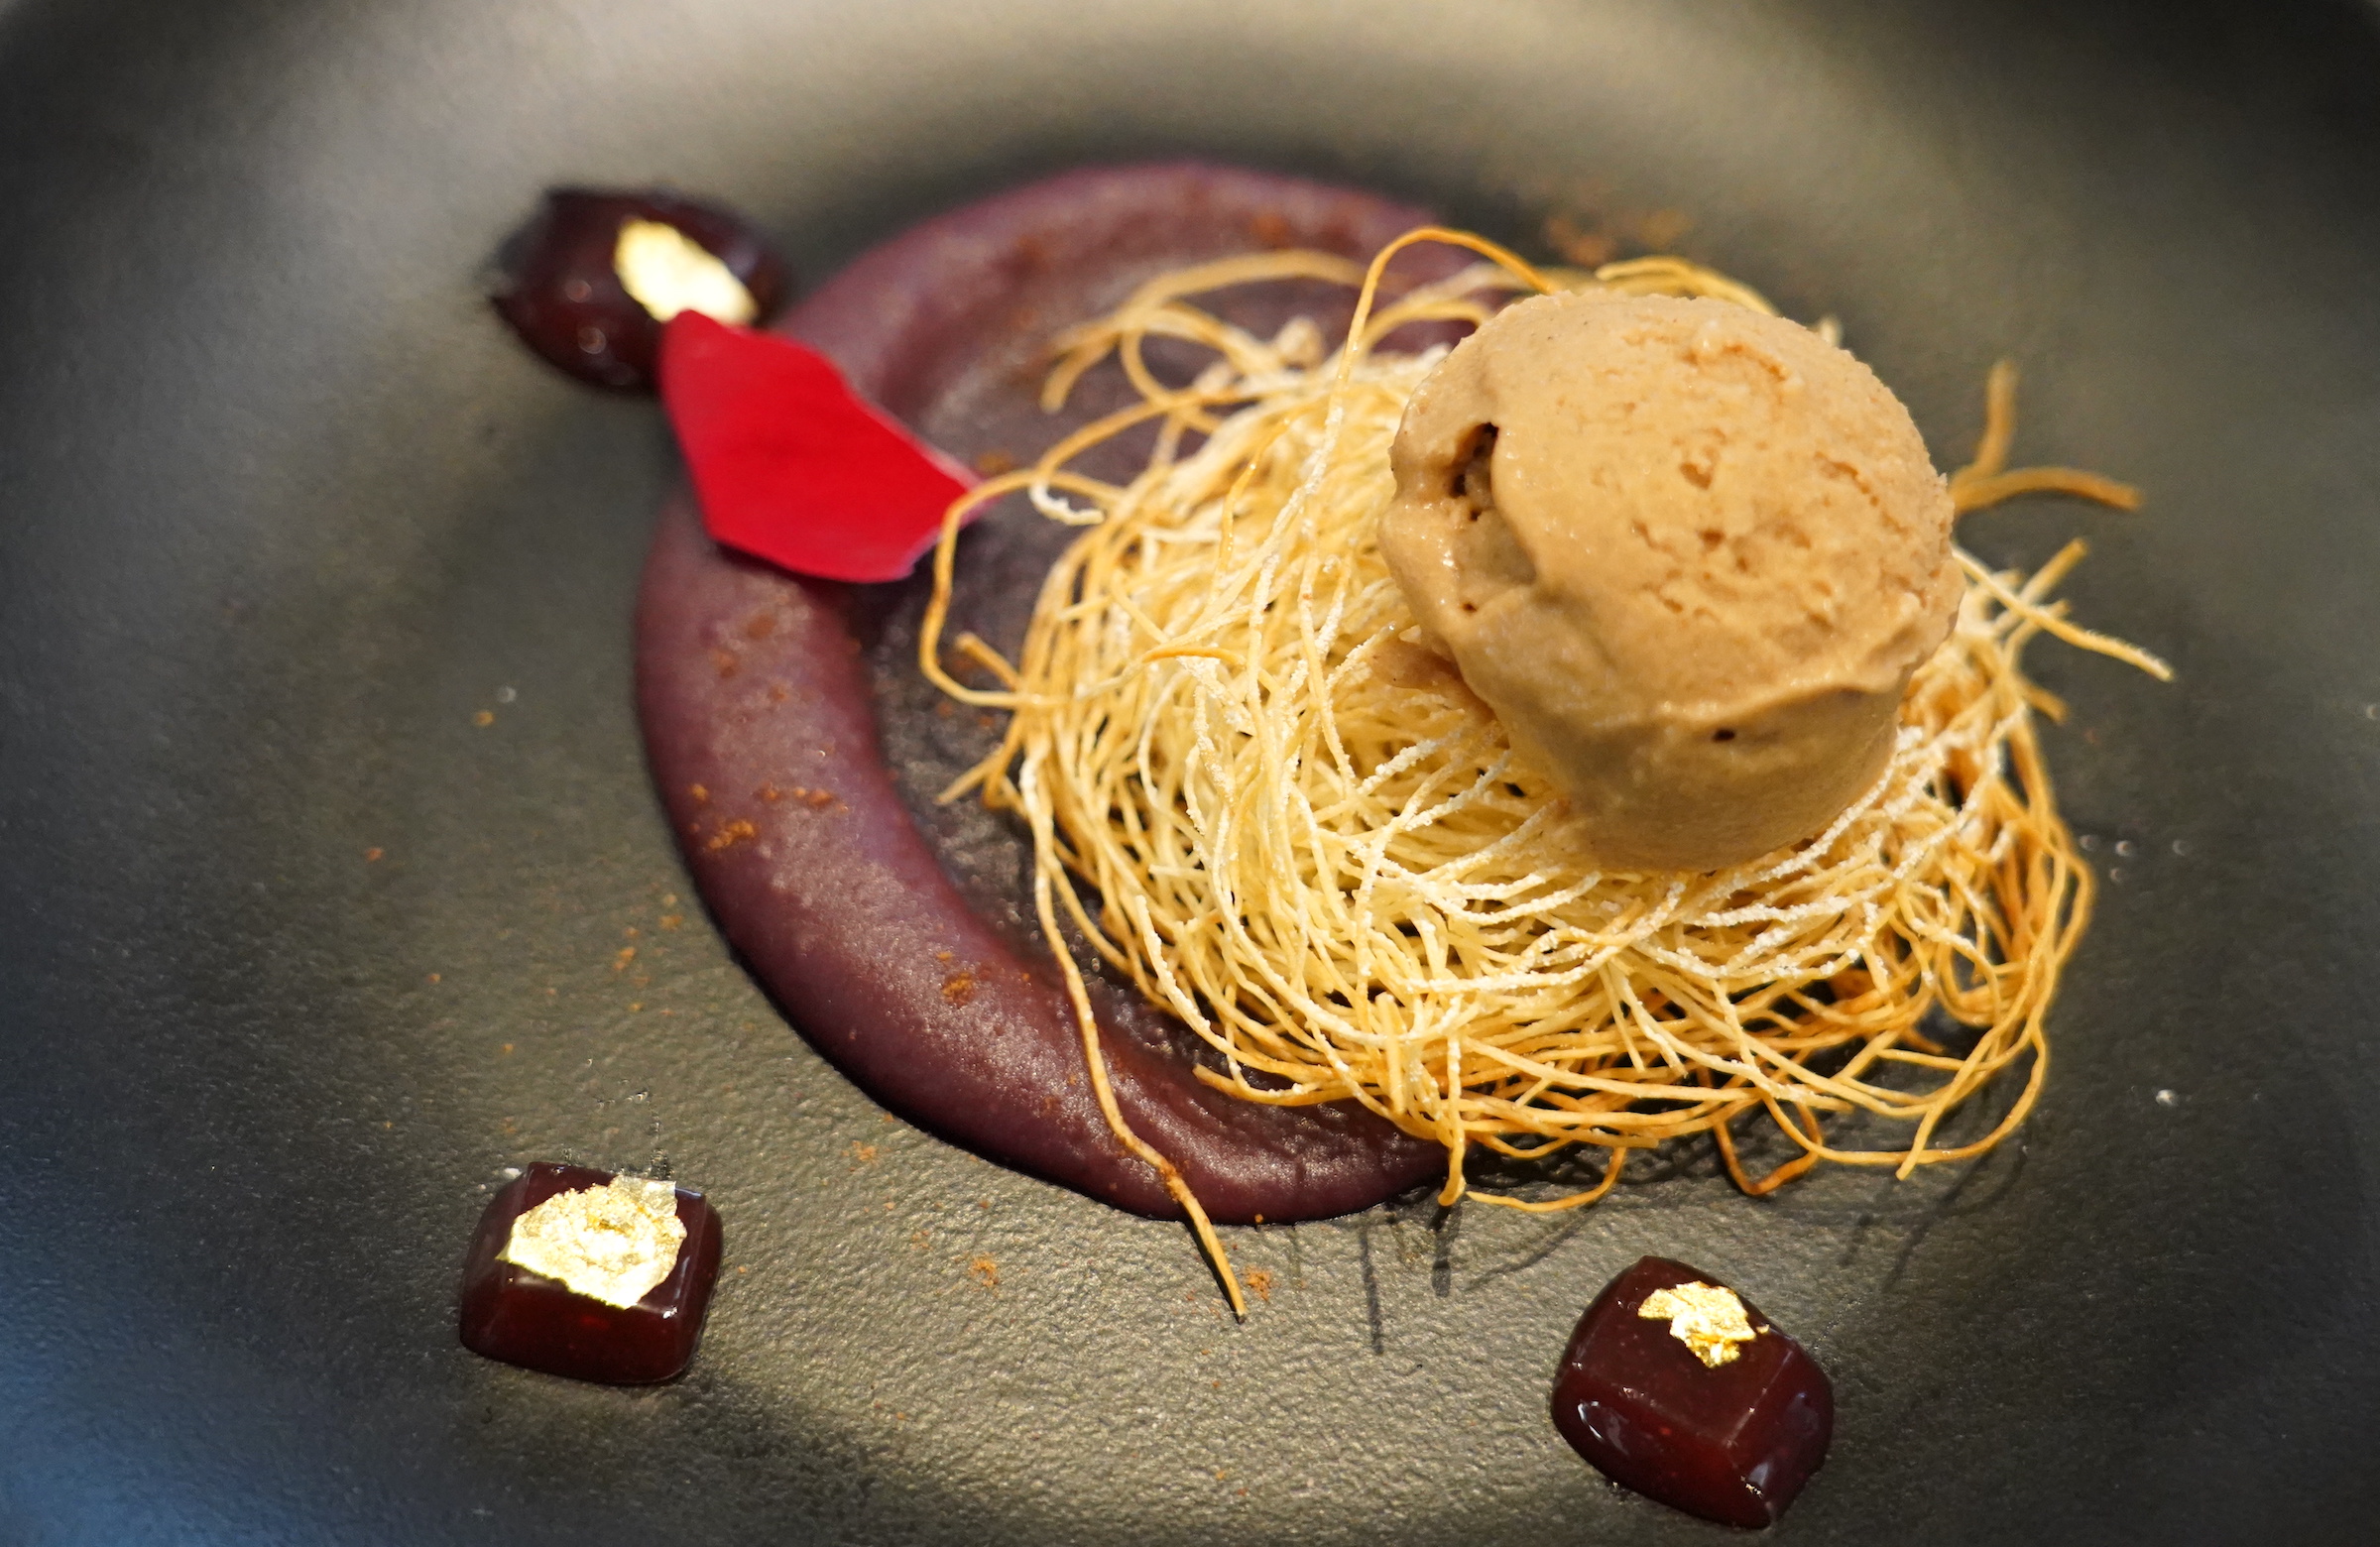 Plant-based ice cream and phyllo dough on top of purple sweet potato puree sit on a black plate